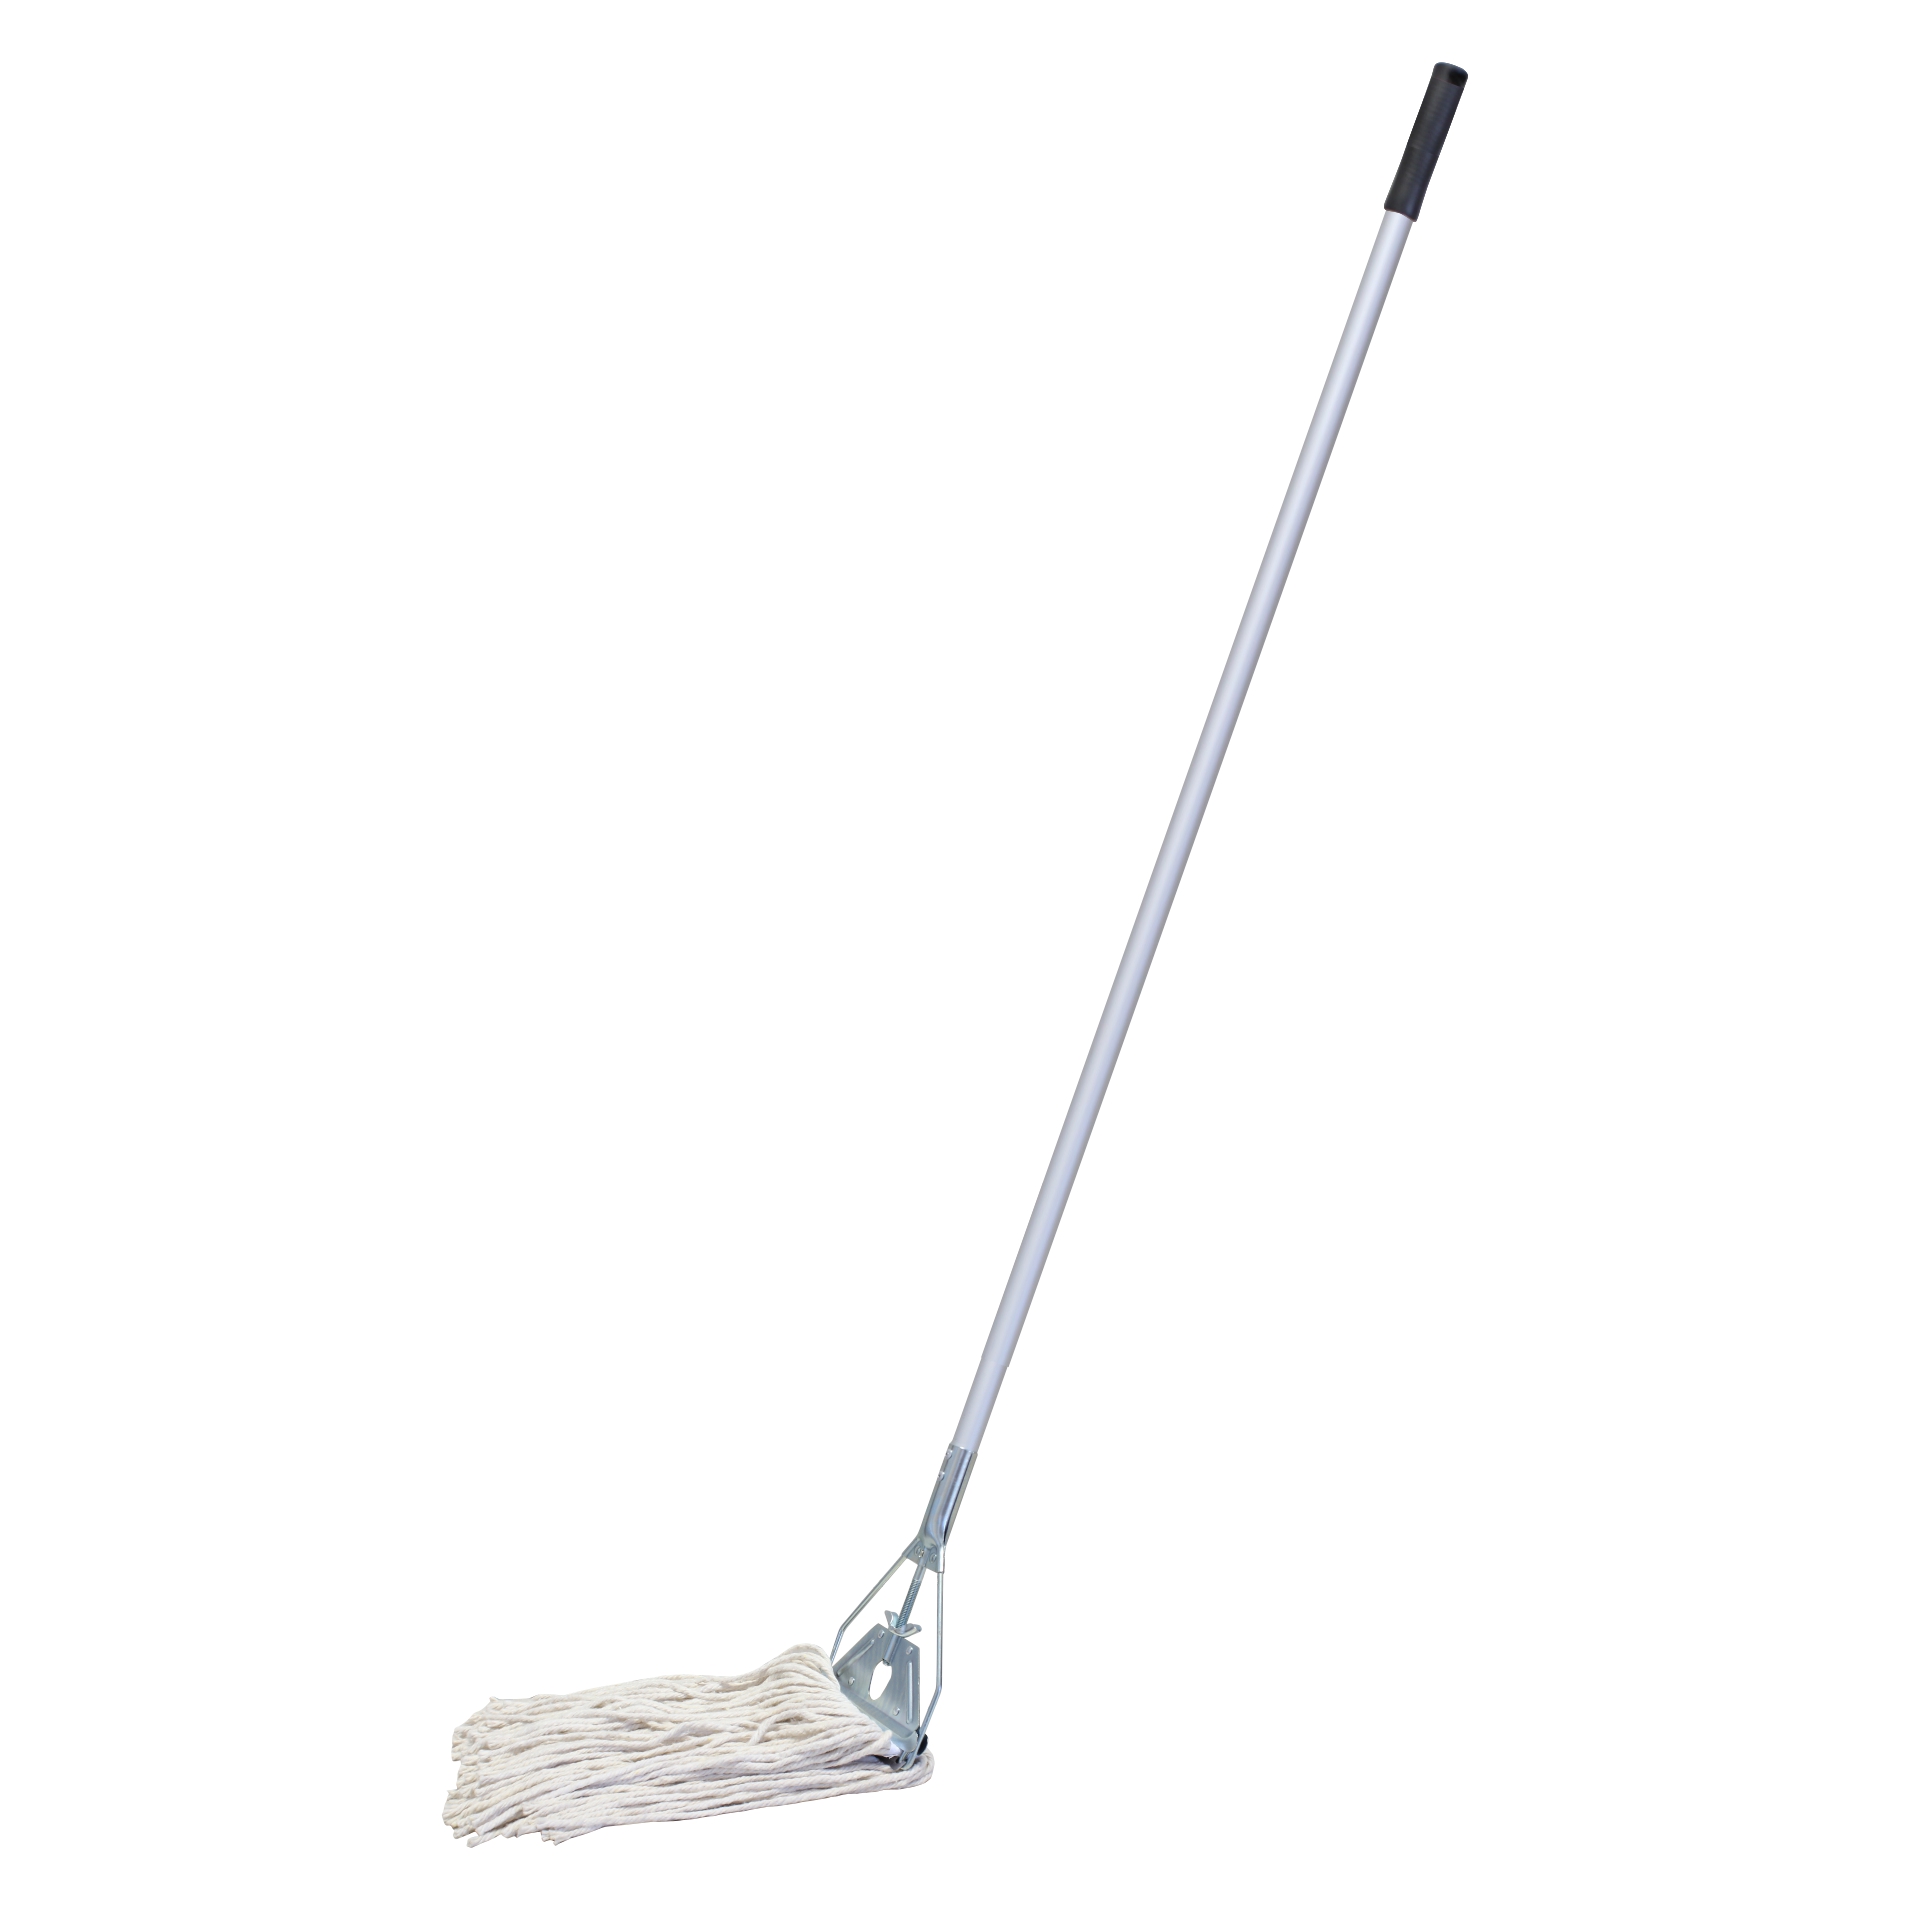 Janitorial Fan Mop 400G with Aluminium Handle